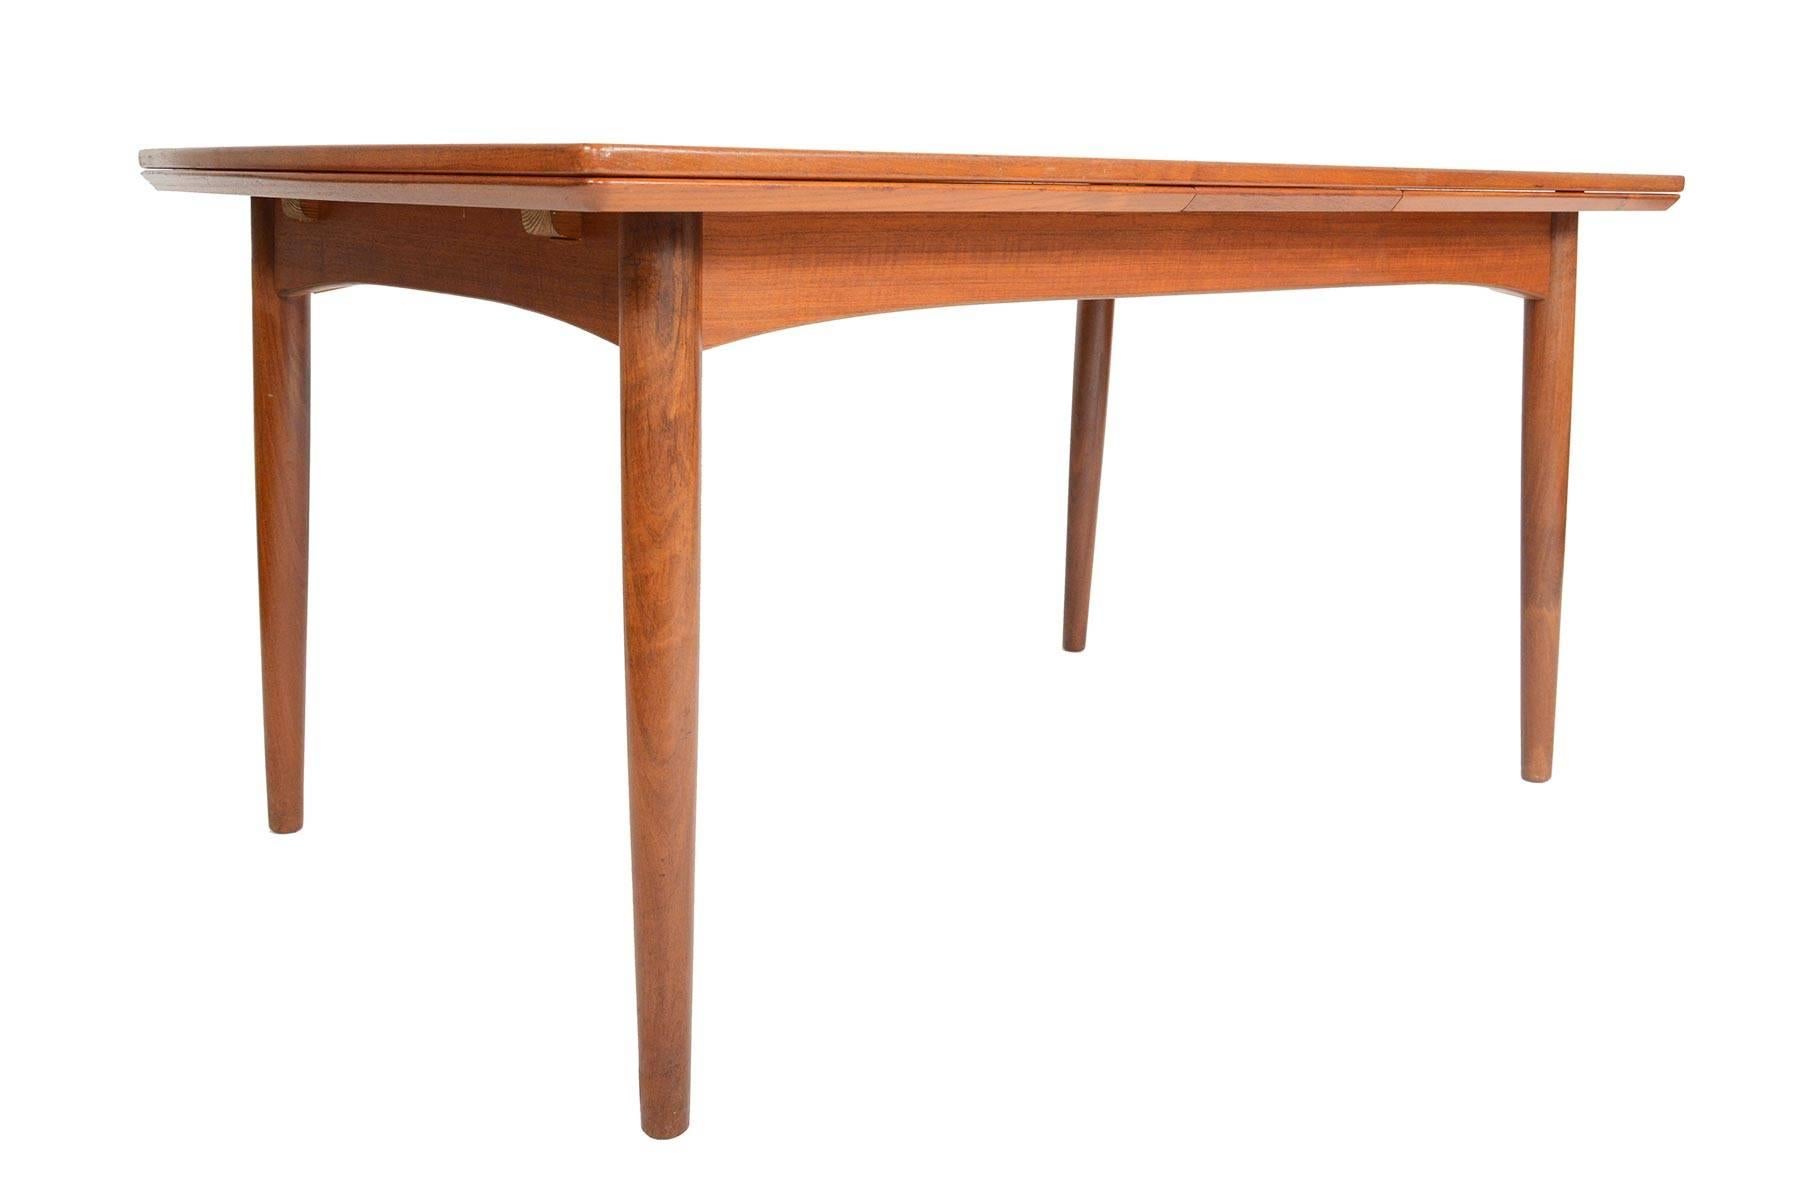 This beautiful teak dining table was designed and constructed in Denmark in the mid-1960s. Featuring handsomely tapered legs and bowed edges, this table is executed with wonderful detailing throughout. Two Dutch leaves pull out to almost double the